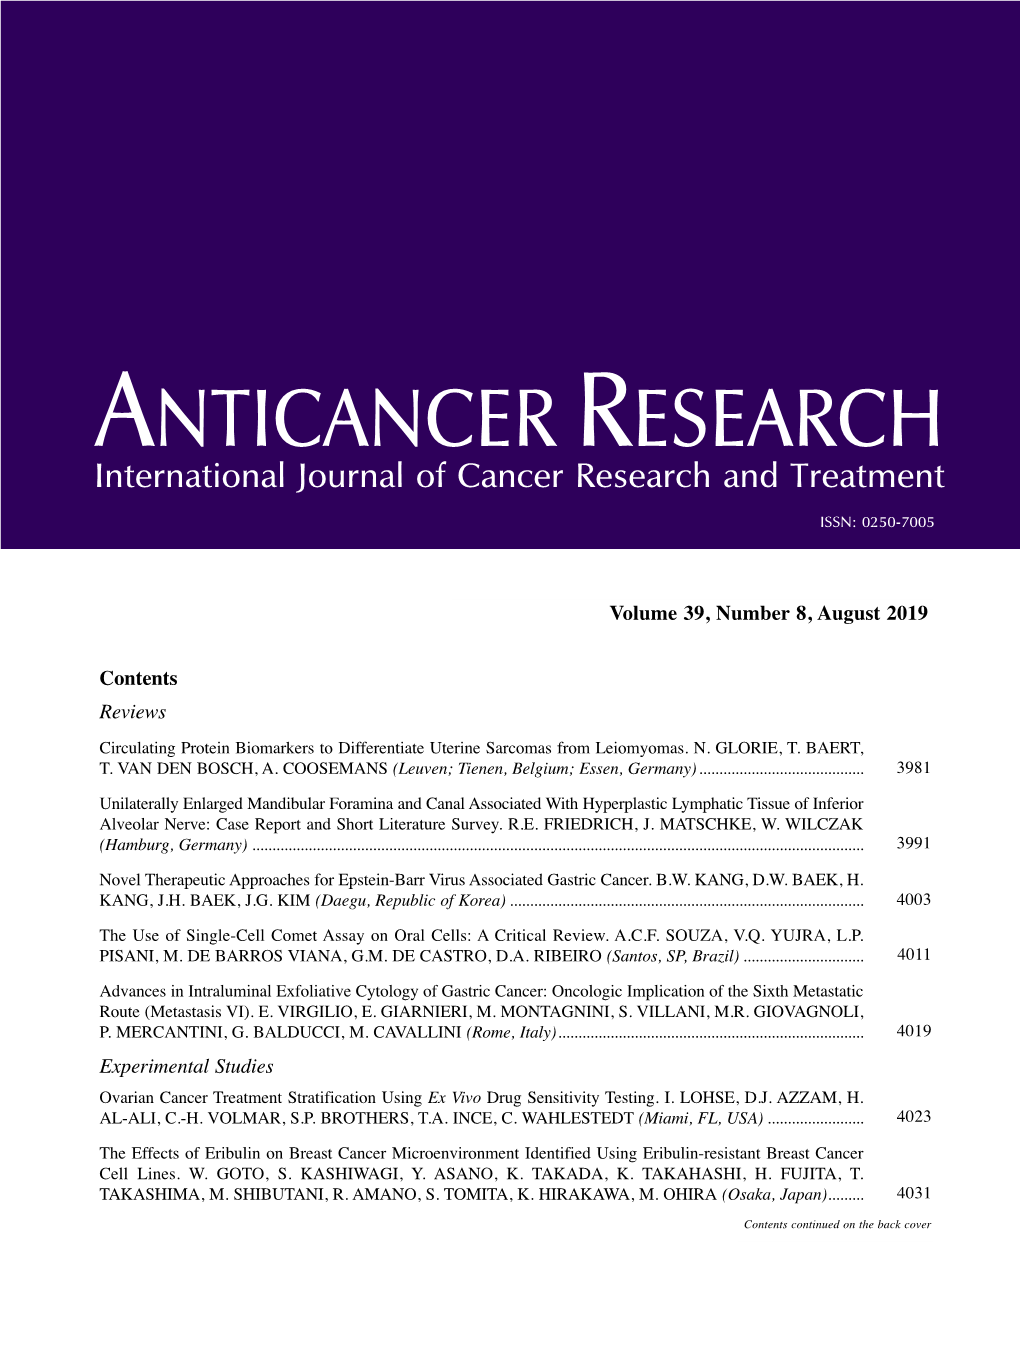 ANTICANCER RESEARCH International Journal of Cancer Research and Treatment